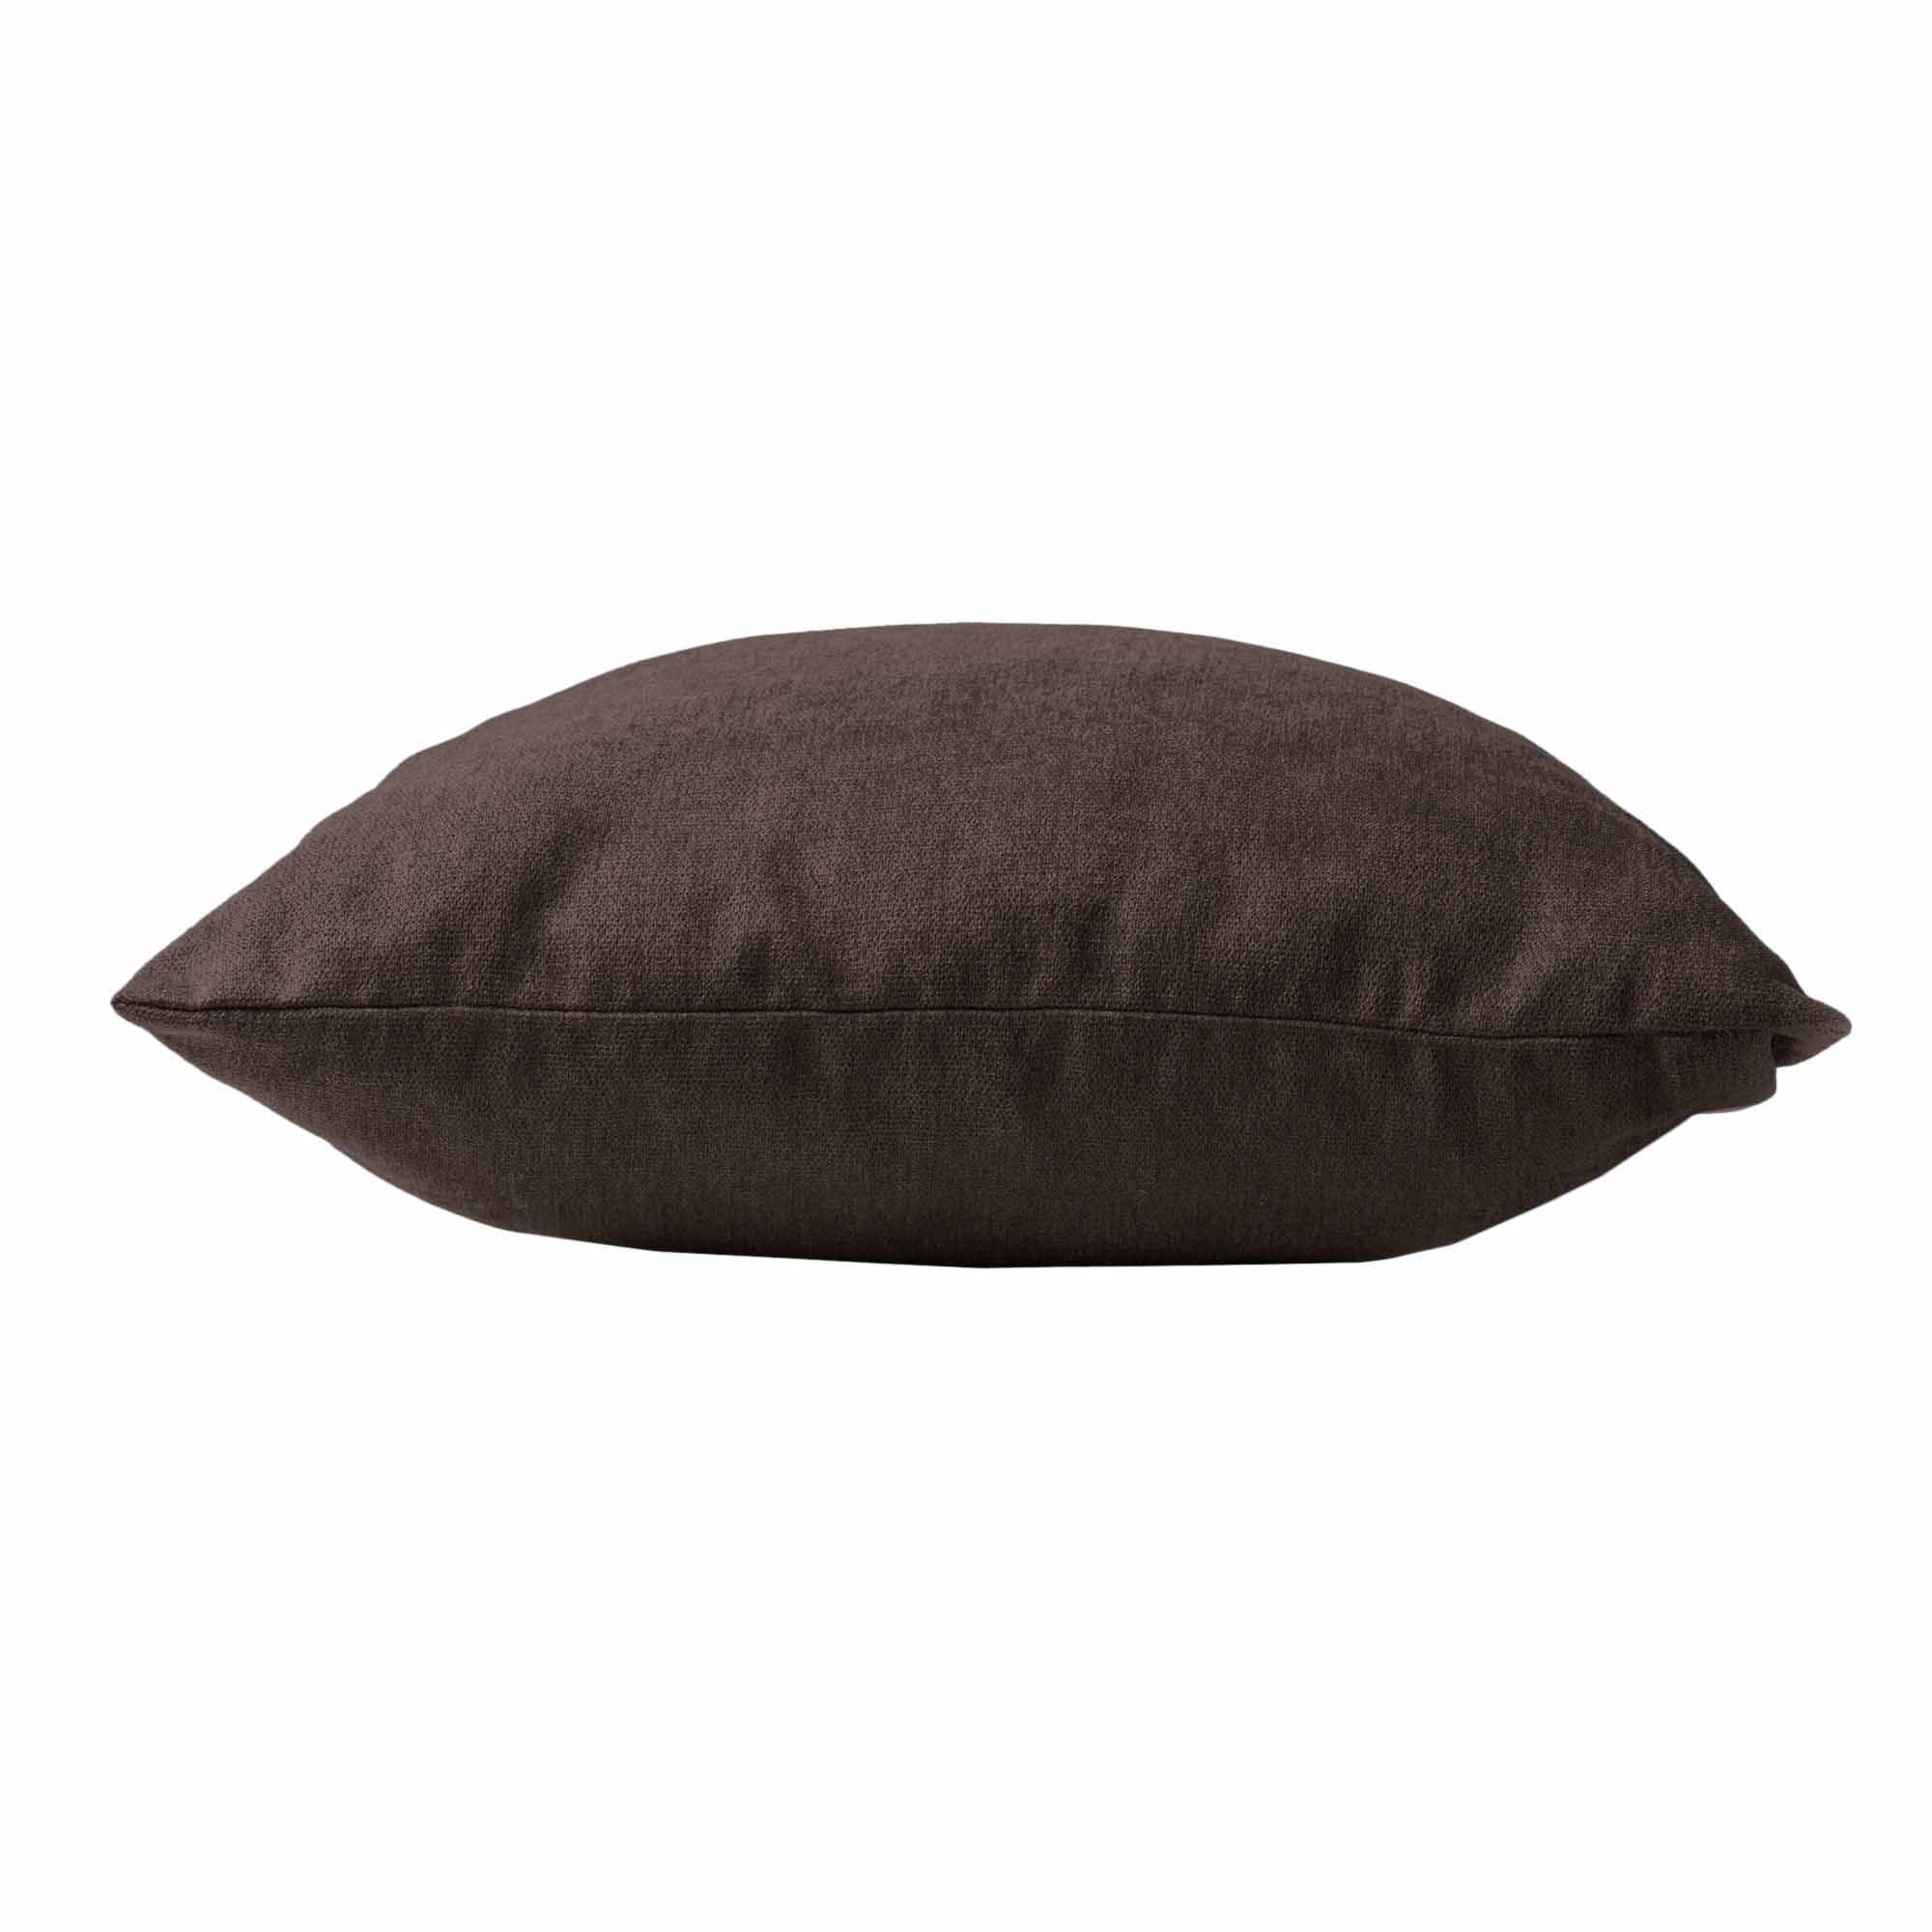 KISSEN Indoor Cushion brown fabric, side view